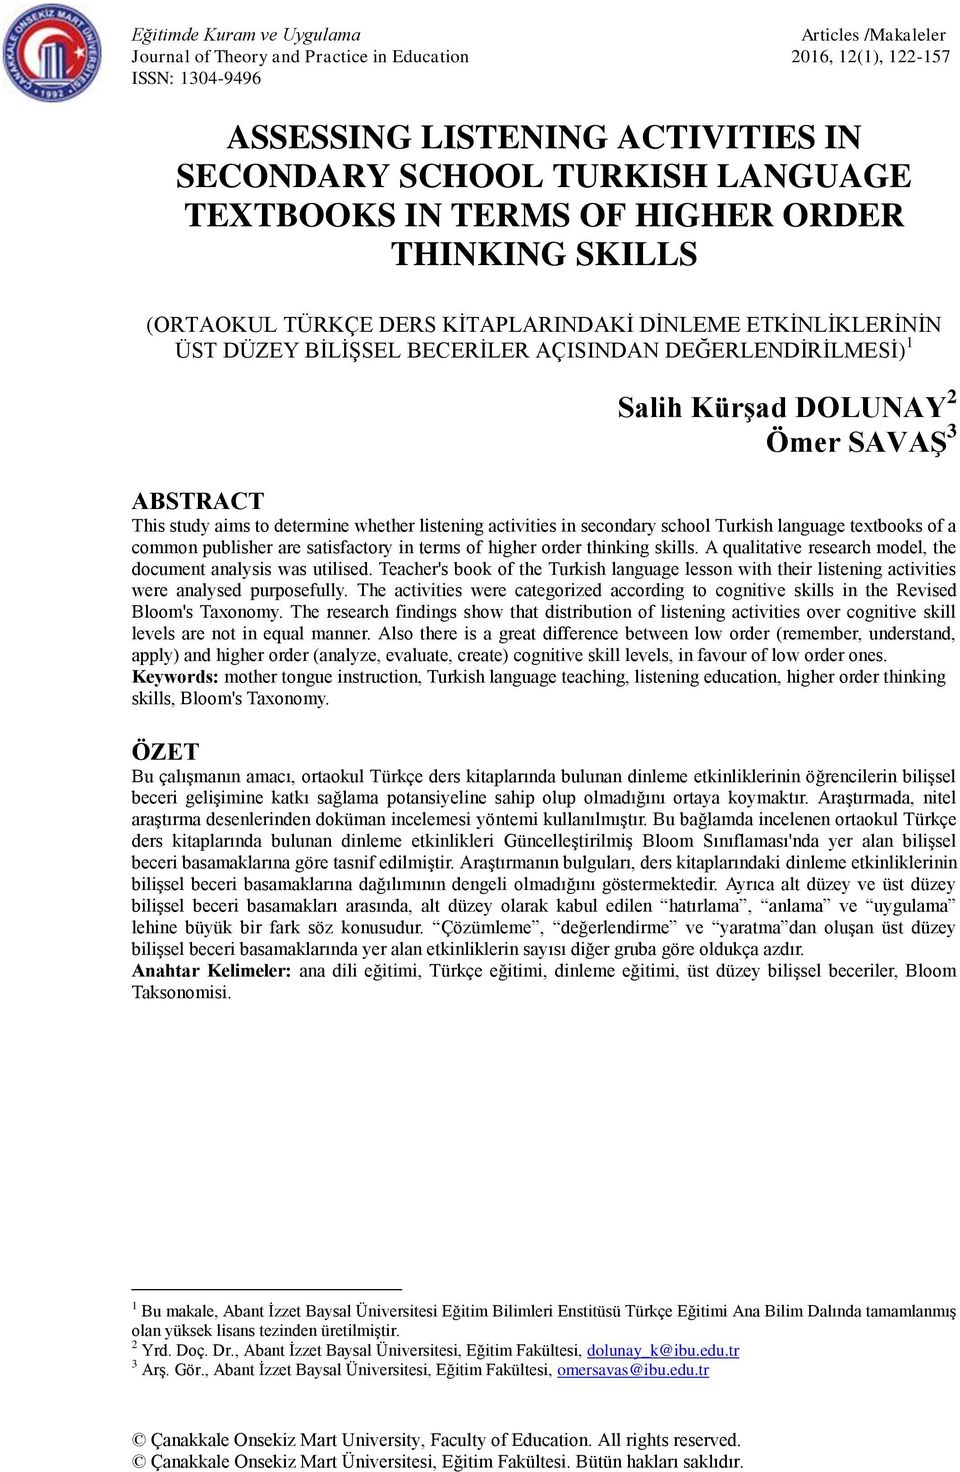 SAVAŞ 3 ABSTRACT This study aims to determine whether listening activities in secondary school Turkish language textbooks of a common publisher are satisfactory in terms of higher order thinking